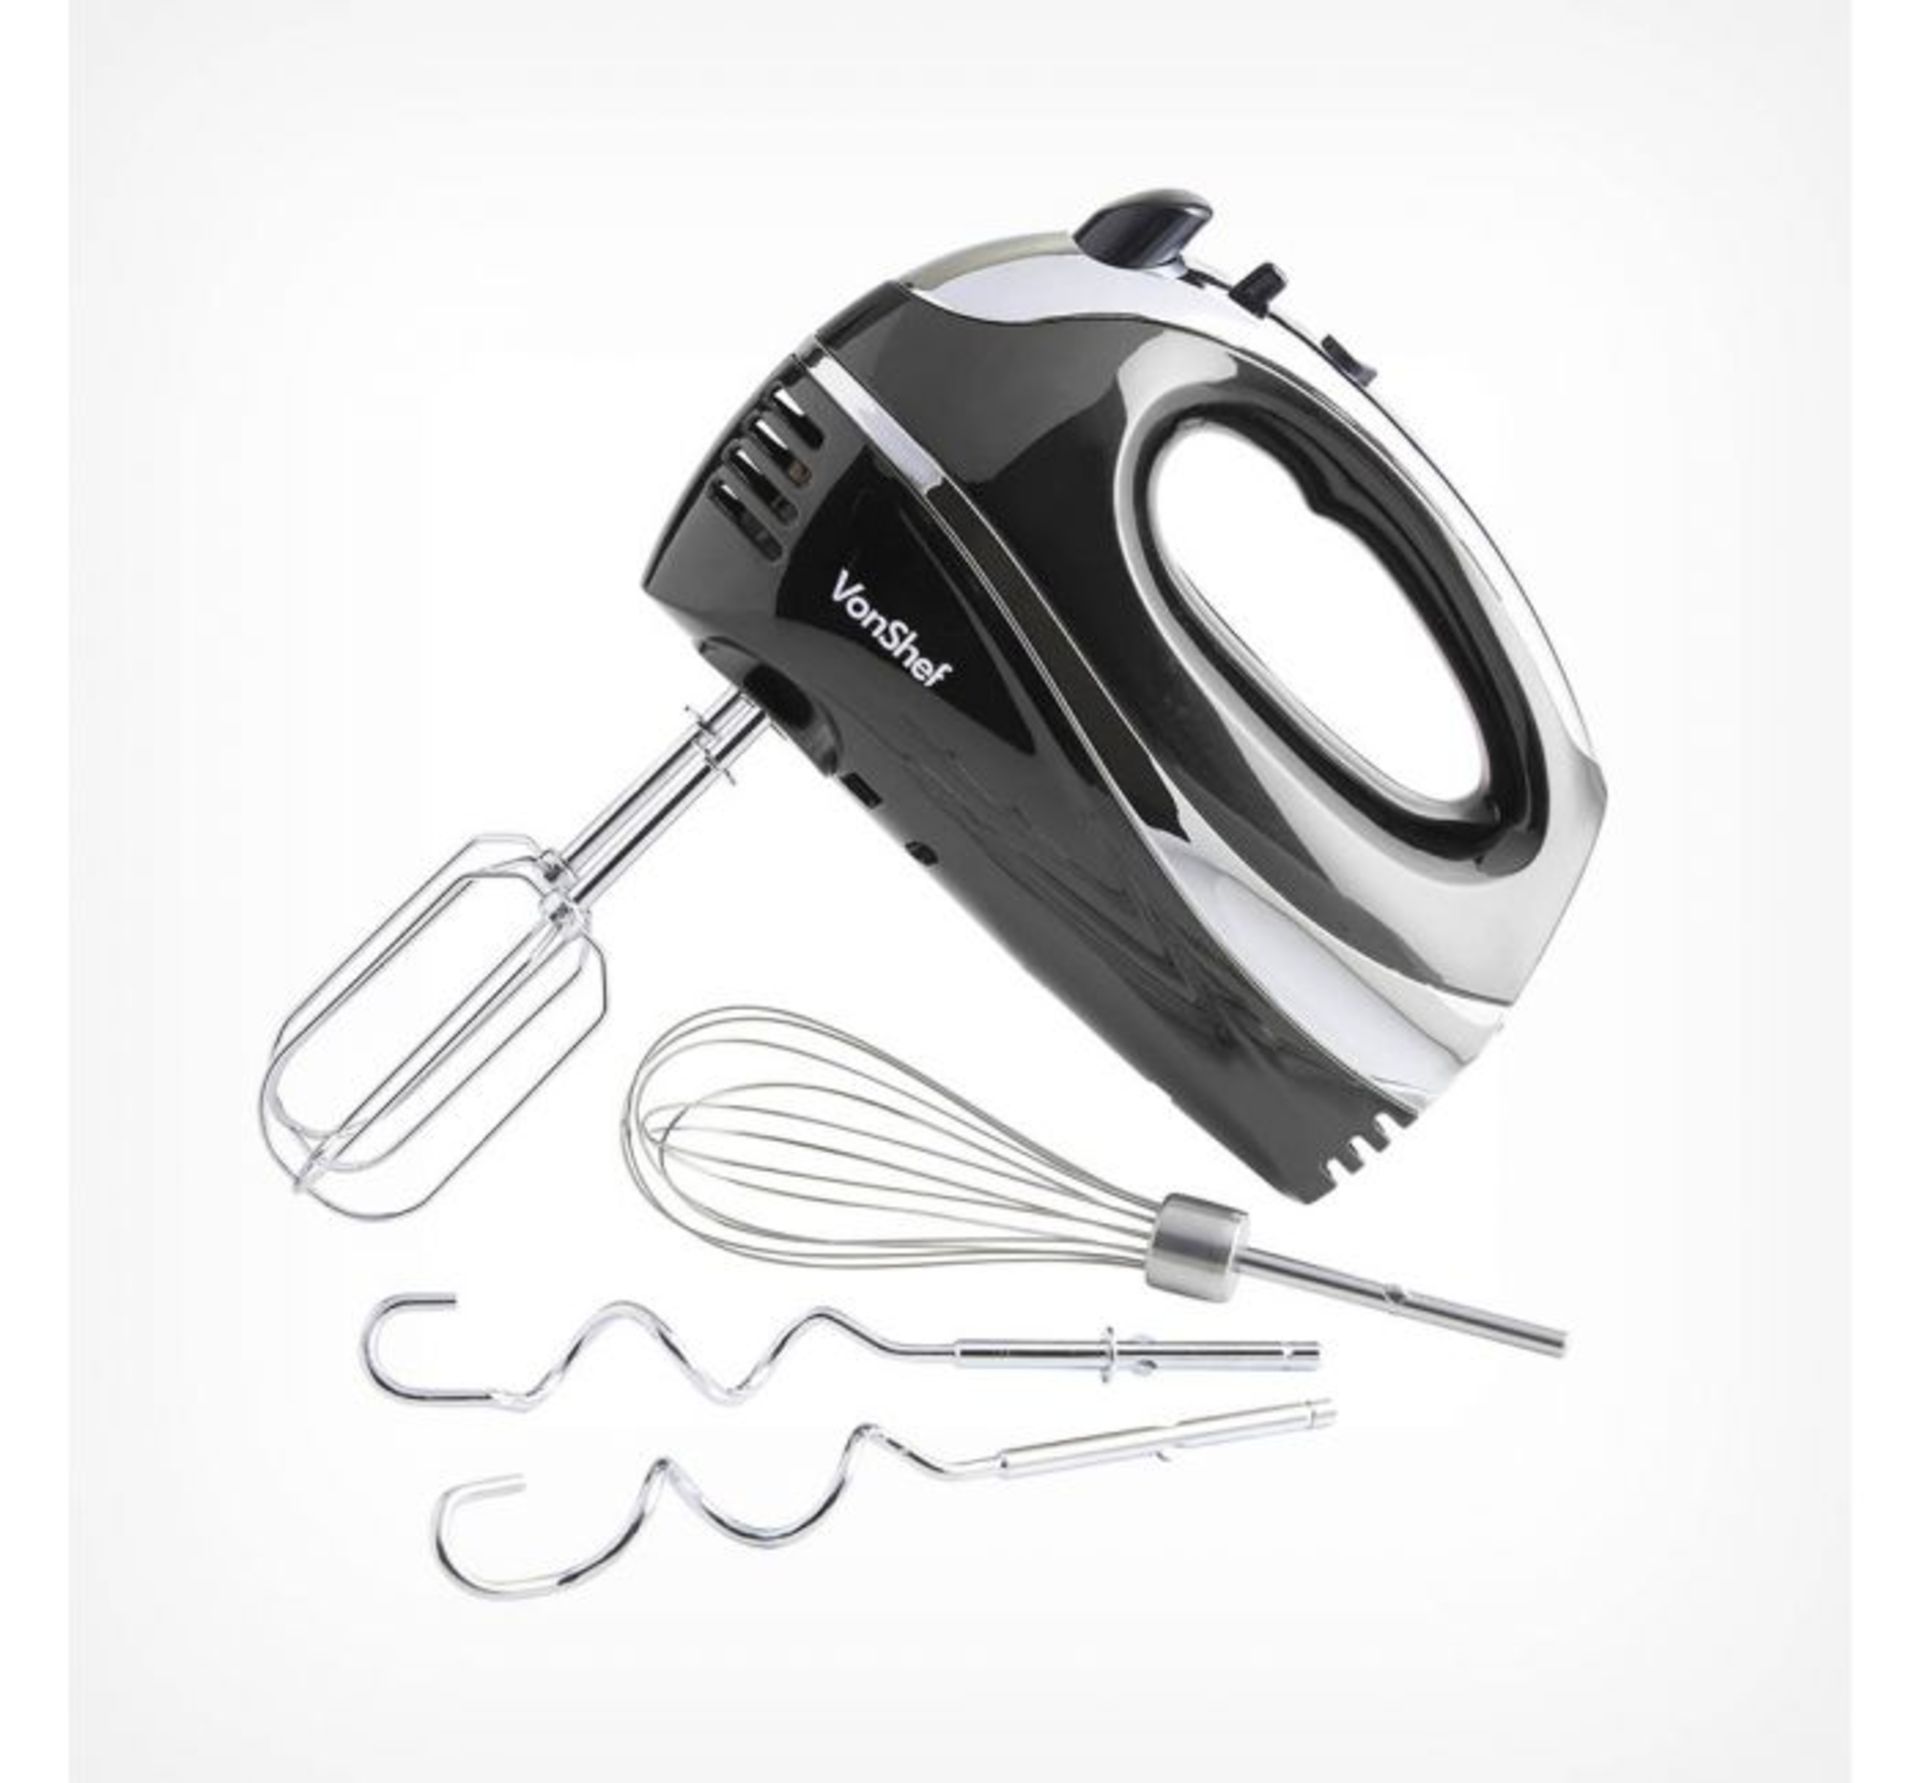 (AP40) 300W Hand Mixer - Black Powerful 300W motor to whisk, mix and knead Includes - 2 beate... - Image 2 of 3